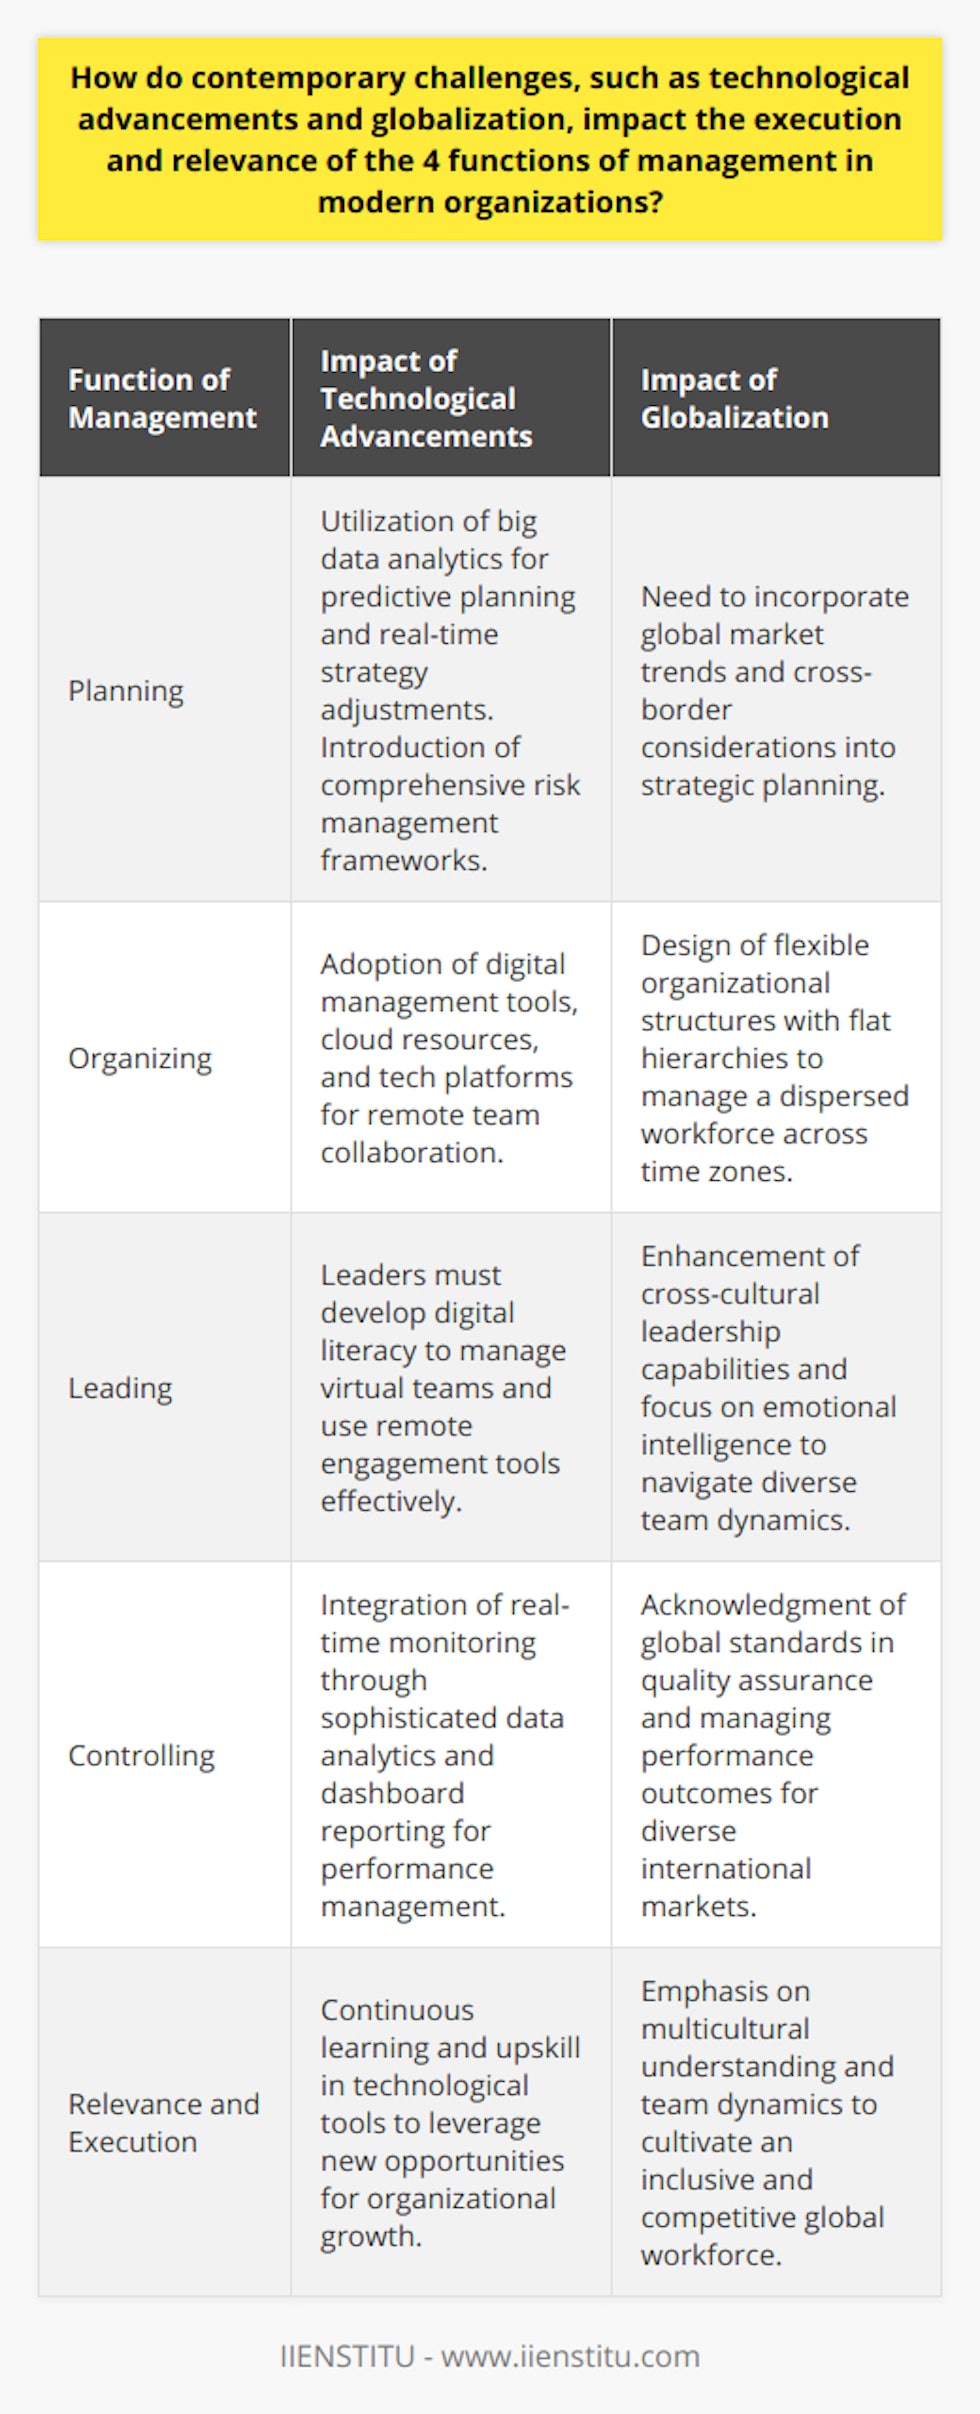 Contemporary challenges such as technological advancements and globalization have substantially reshaped how organizations apply the classic four functions of management: planning, organizing, leading, and controlling. Understanding these impacts is essential as companies navigate a fast-paced, interconnected world.With continuous technological advancements, the planning function of management has transformed. Digital tools enable managers to harness big data for predictive analysis and more nuanced strategic foresight. Consequently, dynamic planning with real-time adjustments is now paramount to keep pace with the rapidly changing business landscape. Moreover, planning strategies incorporate robust risk management frameworks to mitigate the uncertainties brought forth by technology and global interconnectedness.Organizational structures have evolved in the wake of global communication technologies. This altered organizing landscape introduces flat hierarchies and flexible work arrangements, such as remote workforces, which can operate across different regions and time zones. Managers must now be adept at coordinating efforts among geographically dispersed teams, often relying on technology platforms to cultivate collaboration. Digital project management tools and cloud-based resources exemplify such organizing adaptations.Leading in a modern organization requires heightened sensitivity to diversity and inclusiveness. Technological advancements have enabled a globally dispersed workforce, making it necessary for leaders to cultivate emotional intelligence and cross-cultural leadership skills. Leaders must now foster an inclusive environment where all members feel valued and understood. They navigate cultural nuances, employ effective virtual engagement strategies, and inspire employees who they may never meet in person.In controlling, the introduction of sophisticated analytics technologies has revolutionized performance monitoring and quality assurance. Real-time tracking and dashboard reporting provide managers with immediate performance metrics, helping to inform decision-making and refine processes. Despite this immense access to data, the challenge remains to respect privacy and maintain a healthy balance between organizational oversight and individual empowerment.Organizations face a dual imperative to adjust their management functions due to technological progress and global integration: to remain competitive amid rapid change and to be sensitive to the multiplying human factors at play in increasingly diverse and globally distributed teams. Managers must stay abreast of these shifts, equipping themselves with both the technical knowledge to leverage new tools and the interpersonal skills necessary to lead modern, multicultural teams effectively. The relevance of management functions, therefore, continues to be paramount, albeit in an evolved form that reflects our digitally connected and globalized business environment. In this context, organizations such as IIENSTITU, which specialize in offering courses and certifications, provide professionals with critical knowledge and skills to thrive under contemporary challenges. Through such resources, managers can refine their approaches in planning, organizing, leading, and controlling, ensuring their methods address the complexities of today’s global business landscape.